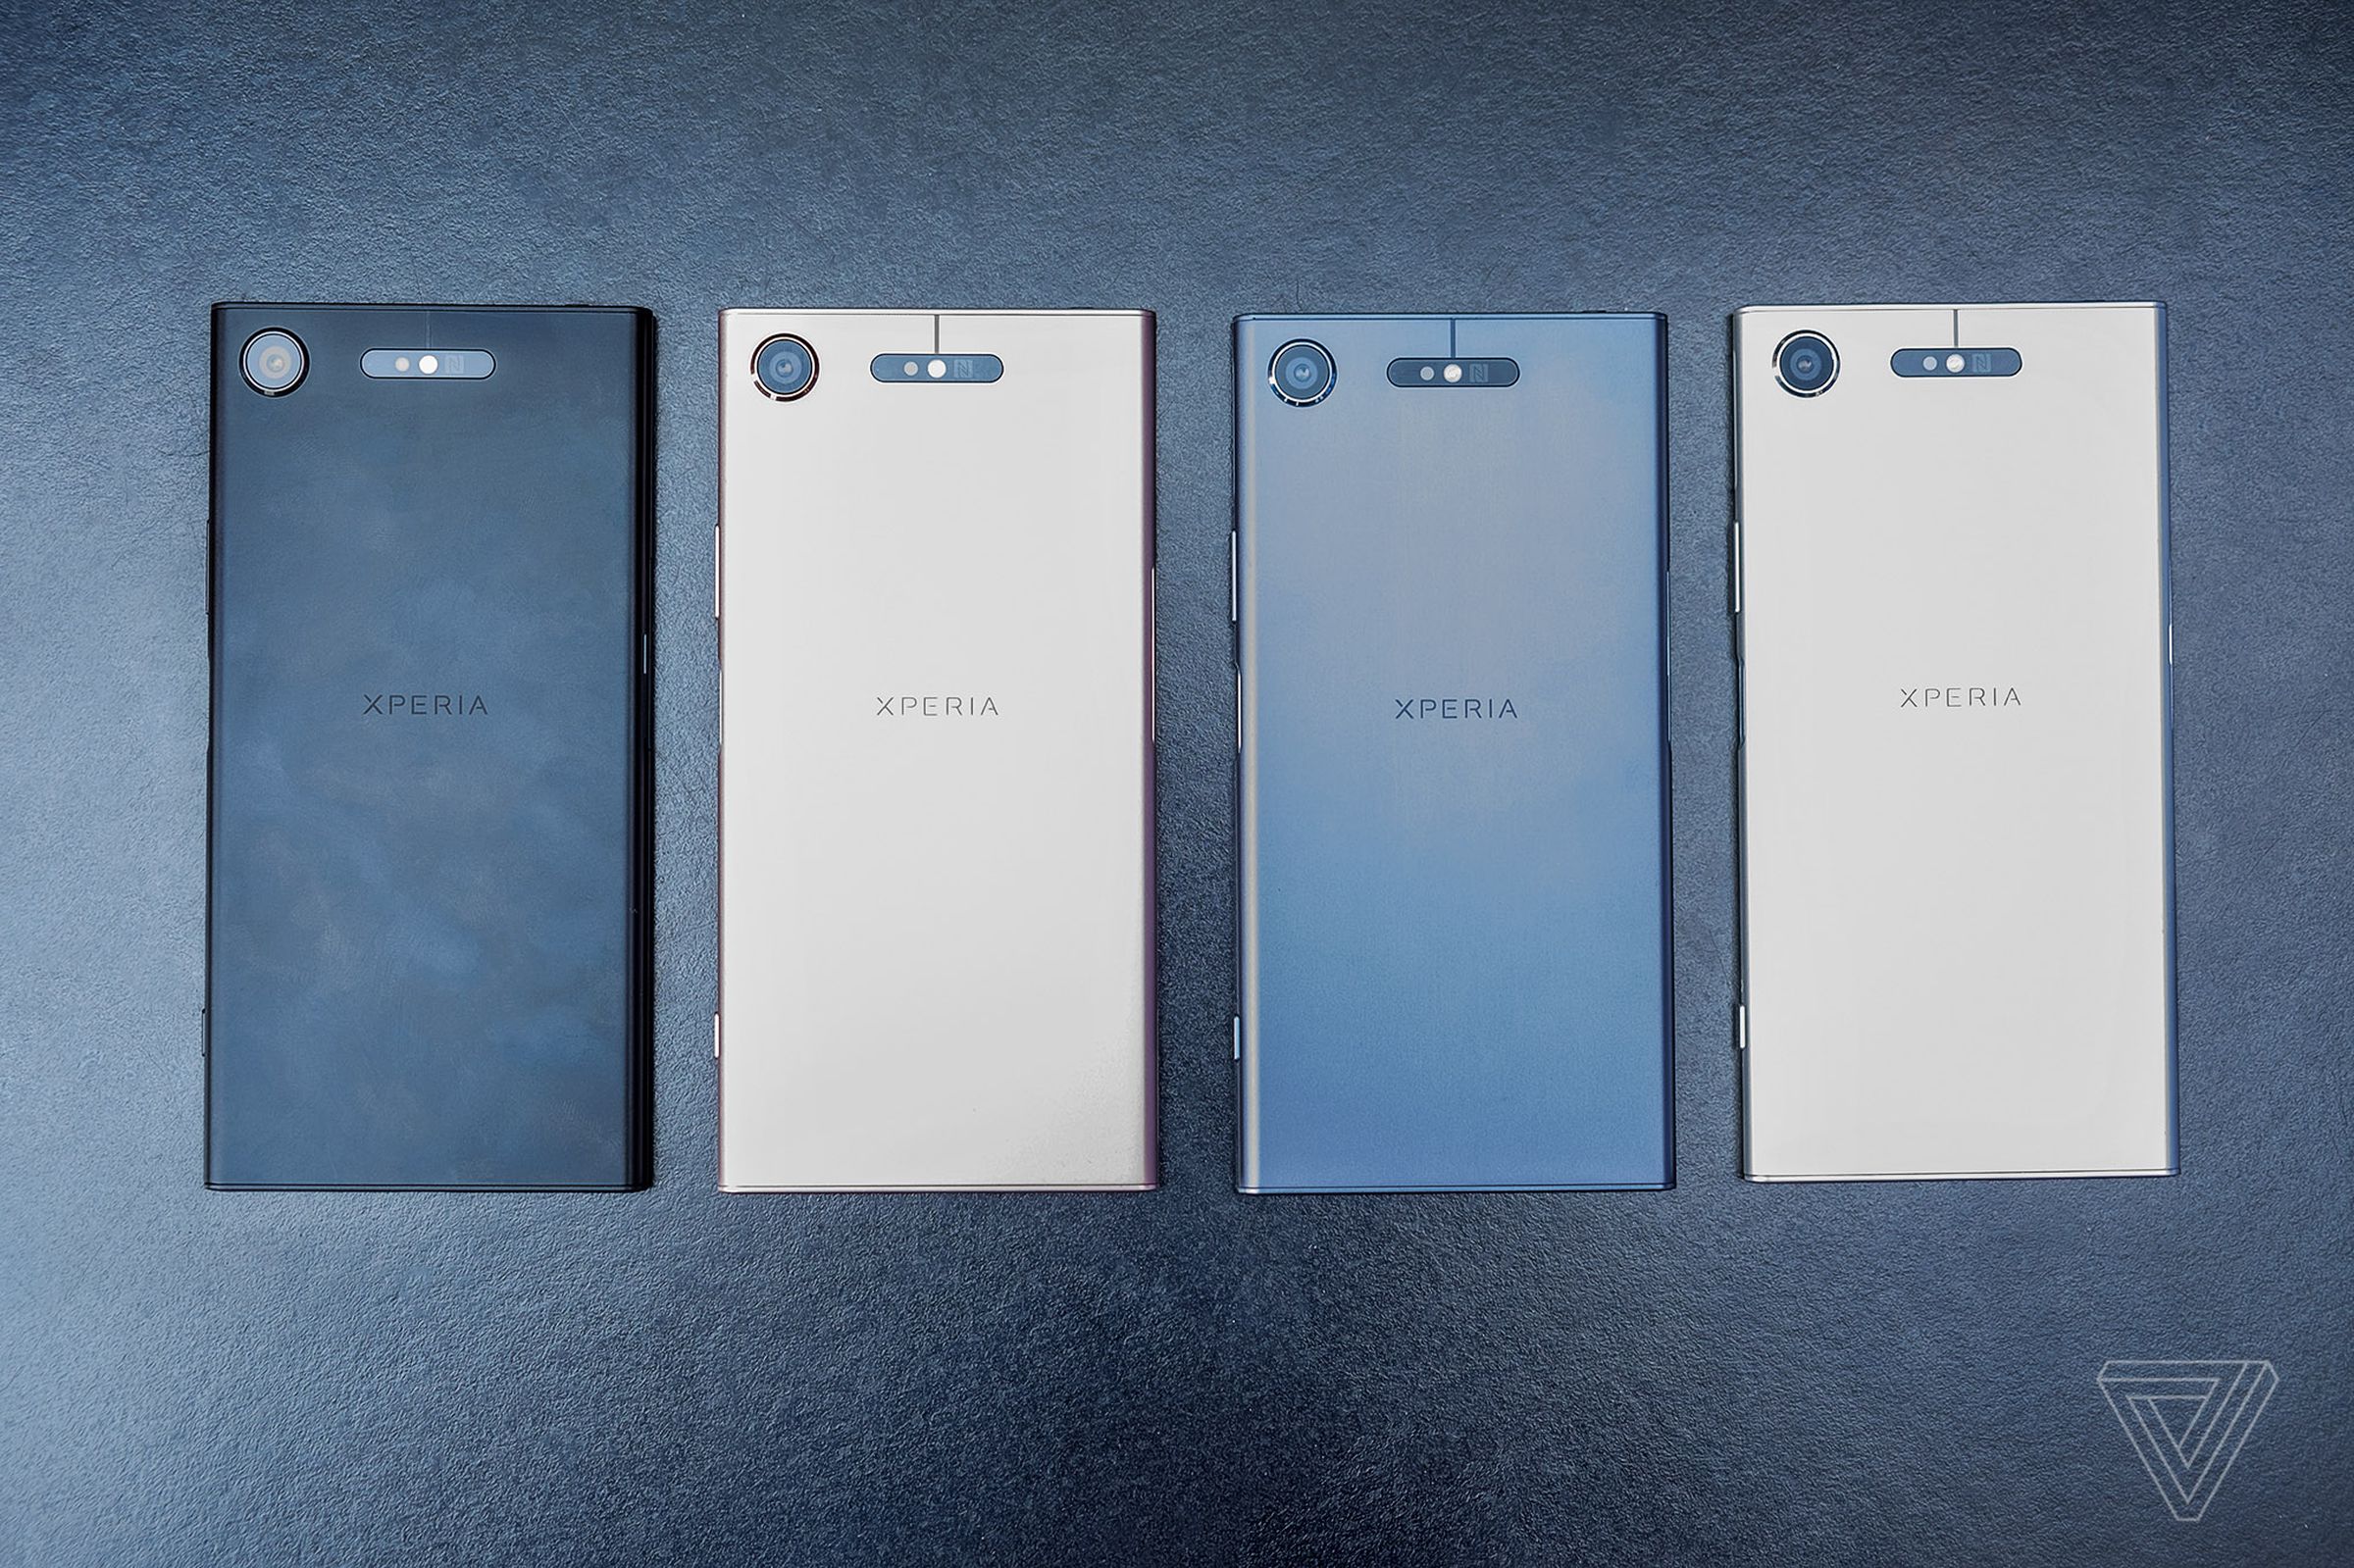 Sony Xperia XZ1 in four colors